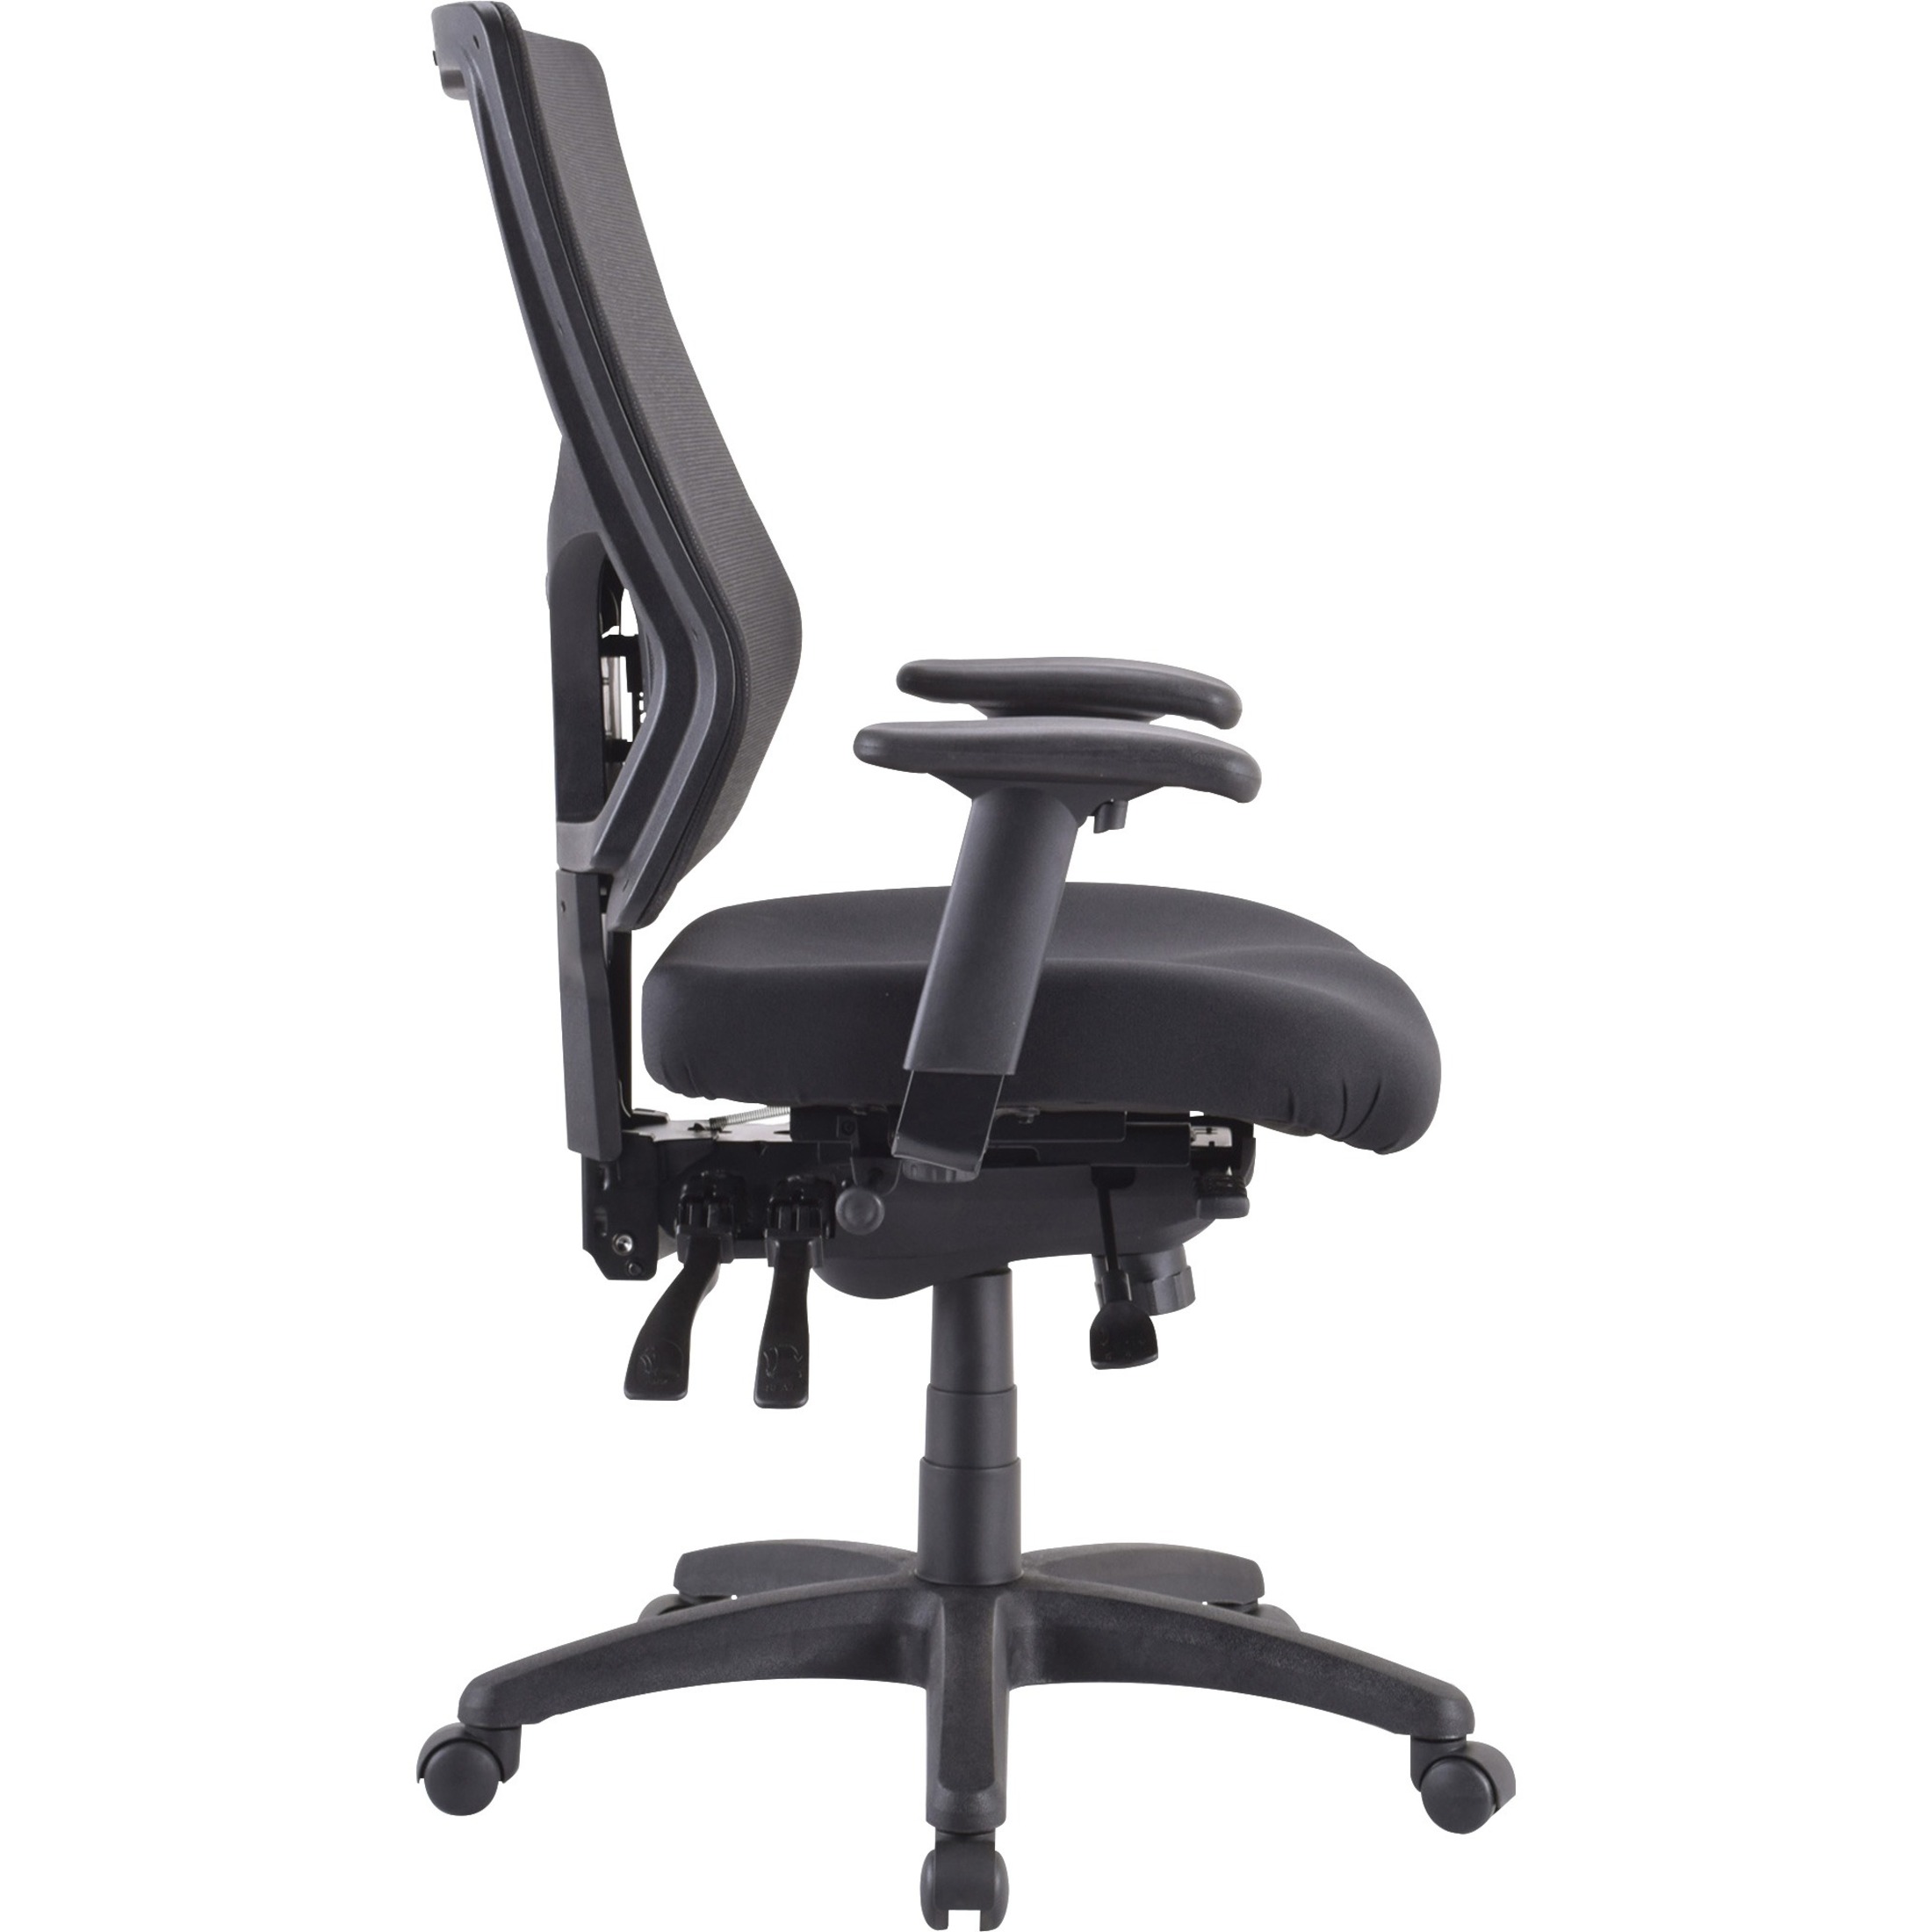 Lorell Conjure Executive High-back Mesh Back Chair - image 4 of 6